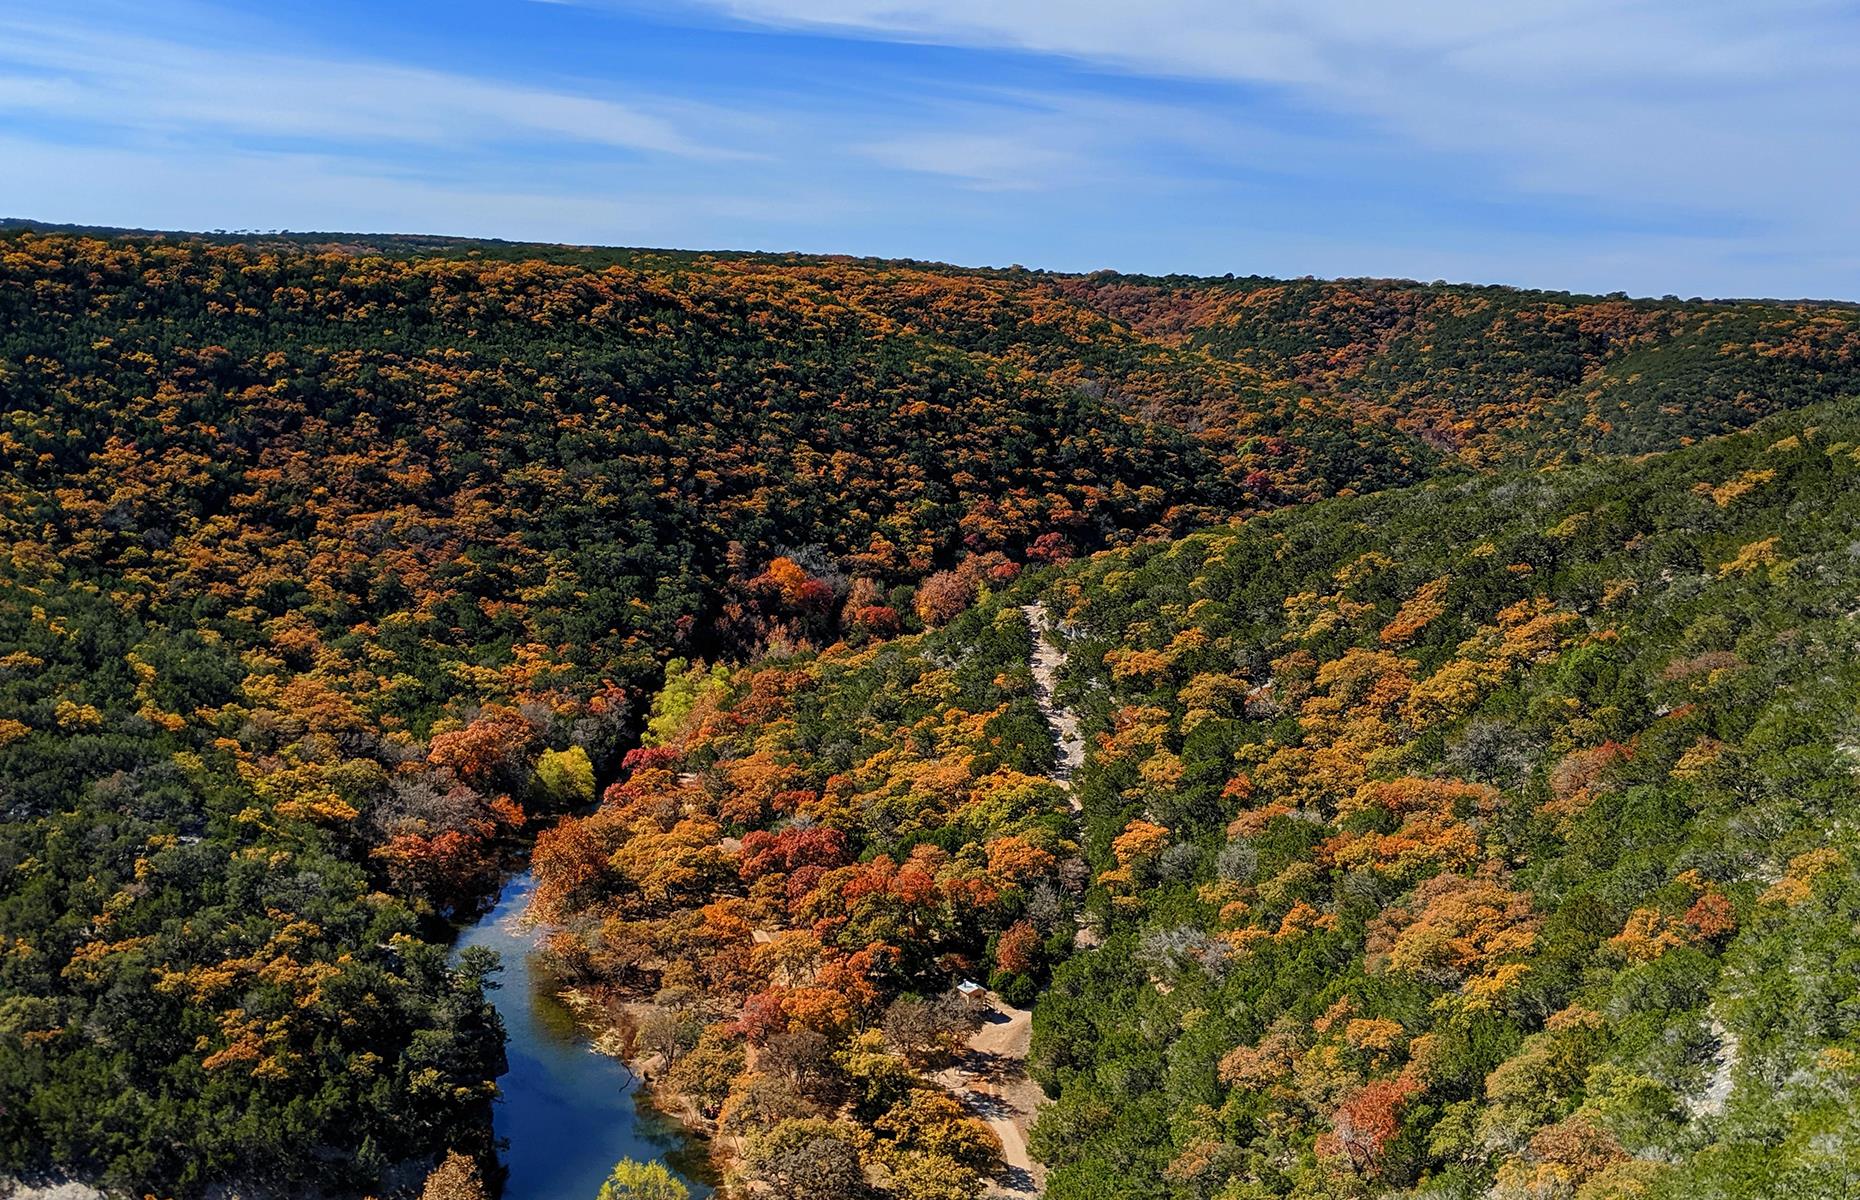 <p>Texas might not be your first thought when planning a leaf-peeping trip, but the <a href="https://tpwd.texas.gov/state-parks/lost-maples">Lost Maples State Natural Area</a> gives the North East a run for its money. The site rambles for more than 2,000 acres, sewn with miles of hiking trails allowing visitors to delve deeper into the fiery fall foliage. The West Trail covers a great expanse and includes a breathtaking overlook, while the shorter West Loop Trail takes in one of the site's rushing springs.</p>  <p><strong><a href="https://www.loveexploring.com/gallerylist/76420/americas-best-autumn-destinations-to-avoid-the-leaf-peepers">Discover more underrated spots for leaf-peeping in the states</a></strong></p>